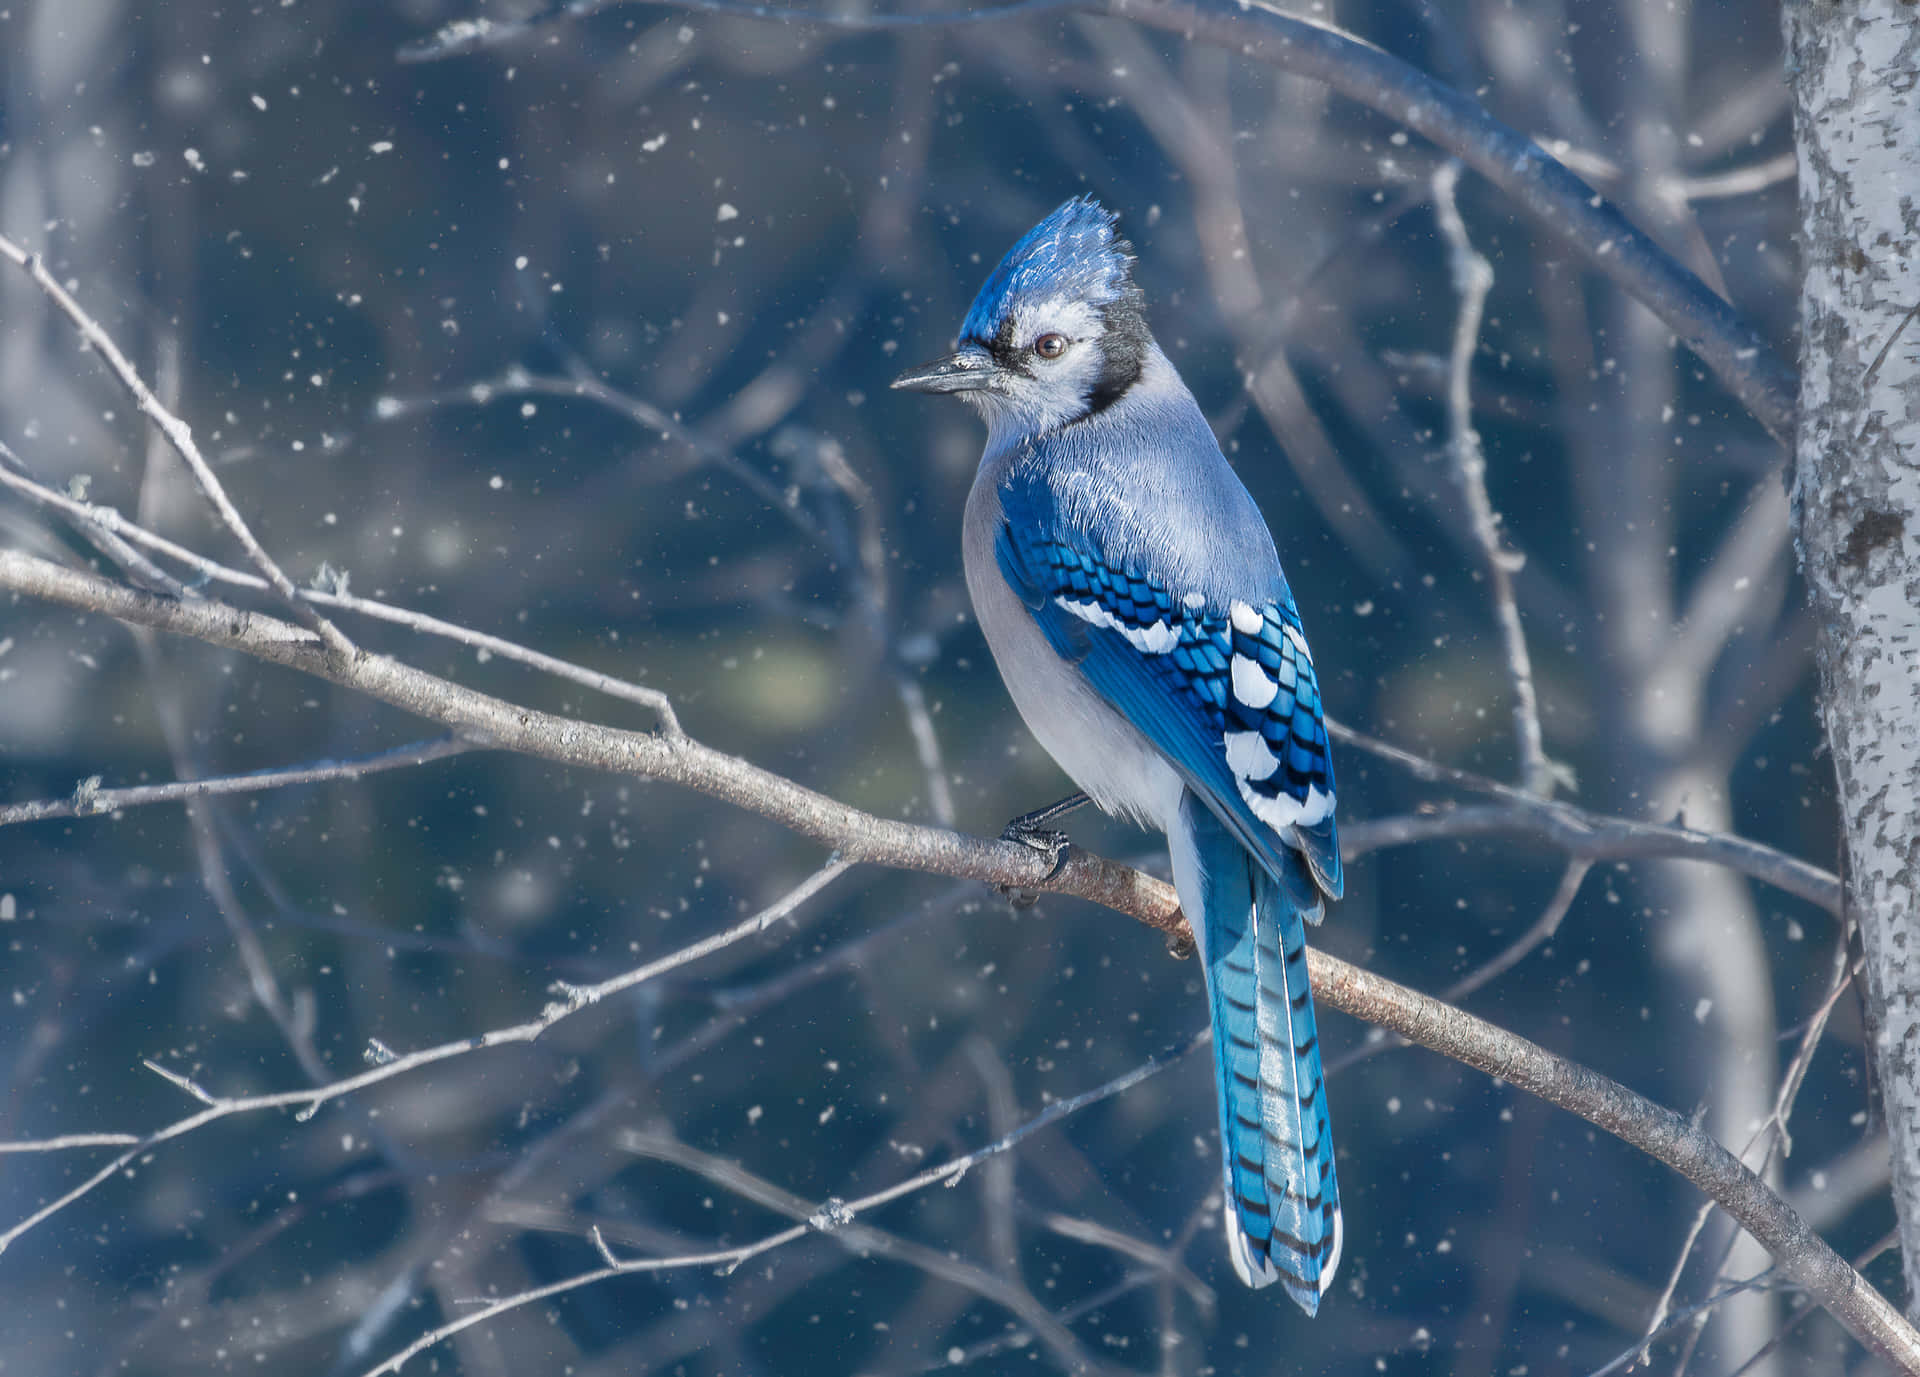 A Blue Jay proudly perched atop a branch looking out upon its domain